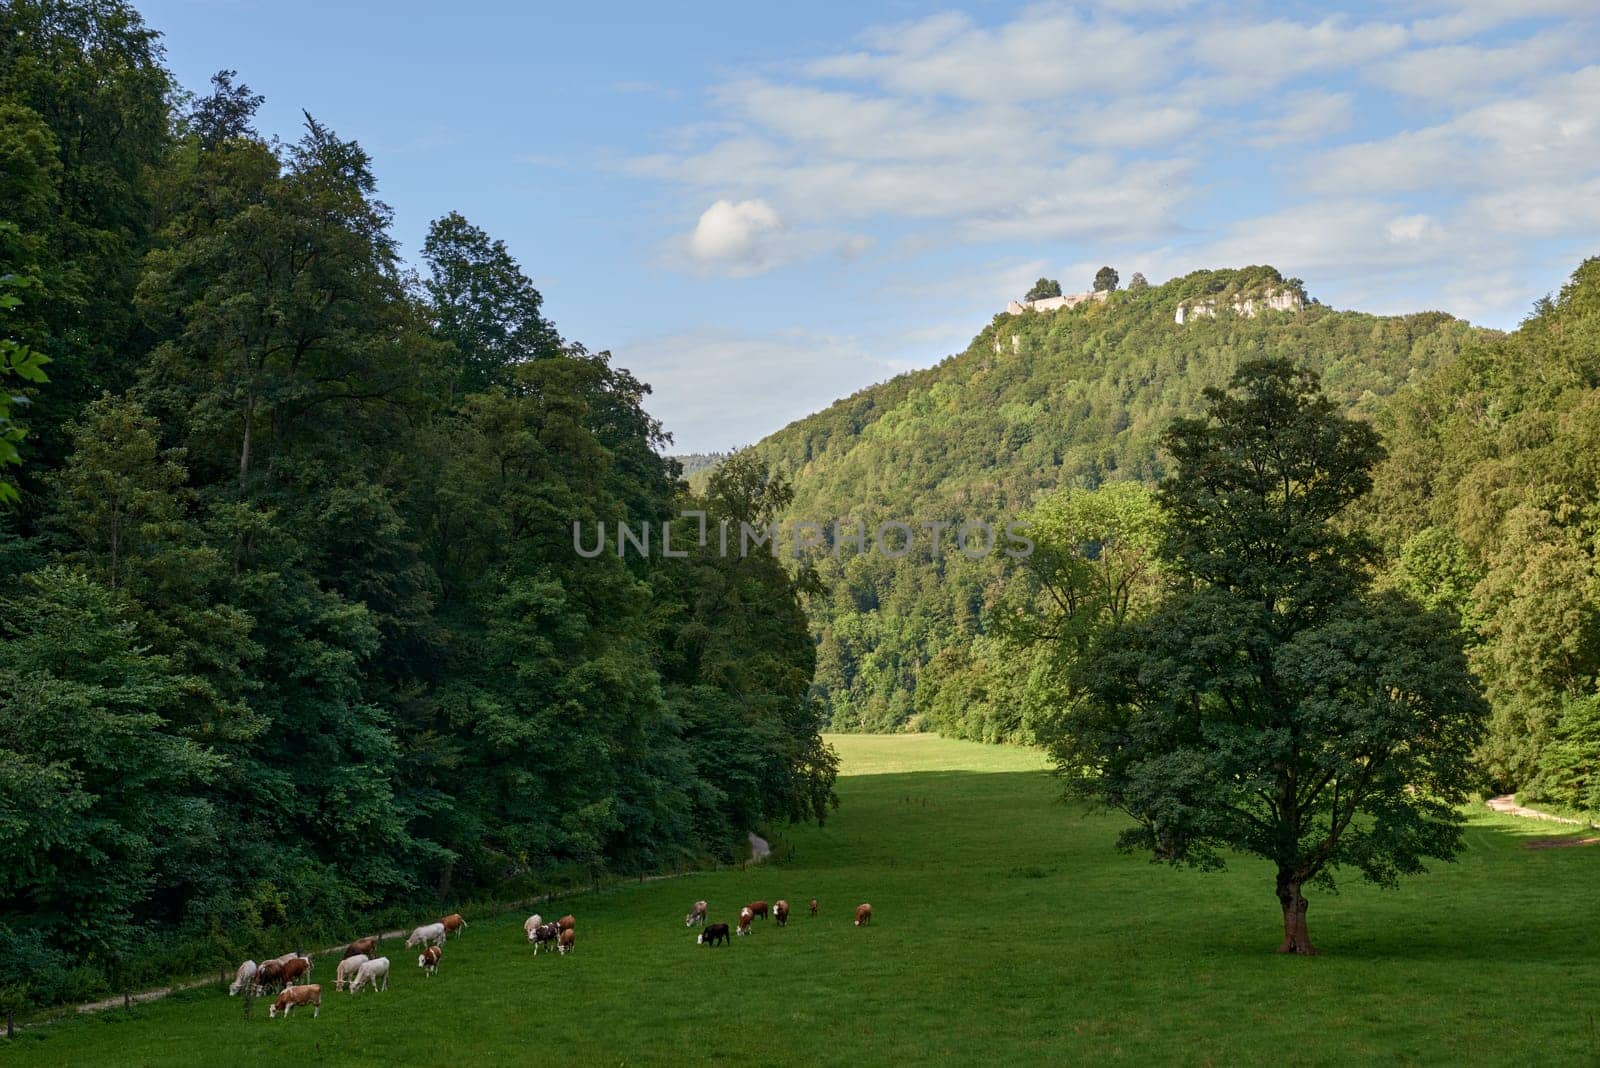 Panoramic shot of heard of sheep grazing on the green meadows with mountains in backdrop. Dramatic aerial view of idyllic rolling patchwork farmland with pretty wooded boundaries, lit in warm early evening sunshine. Sheep Grazing in Uracher Wasserfall Valley, Scenic German Landscape Exploration by Andrii_Ko